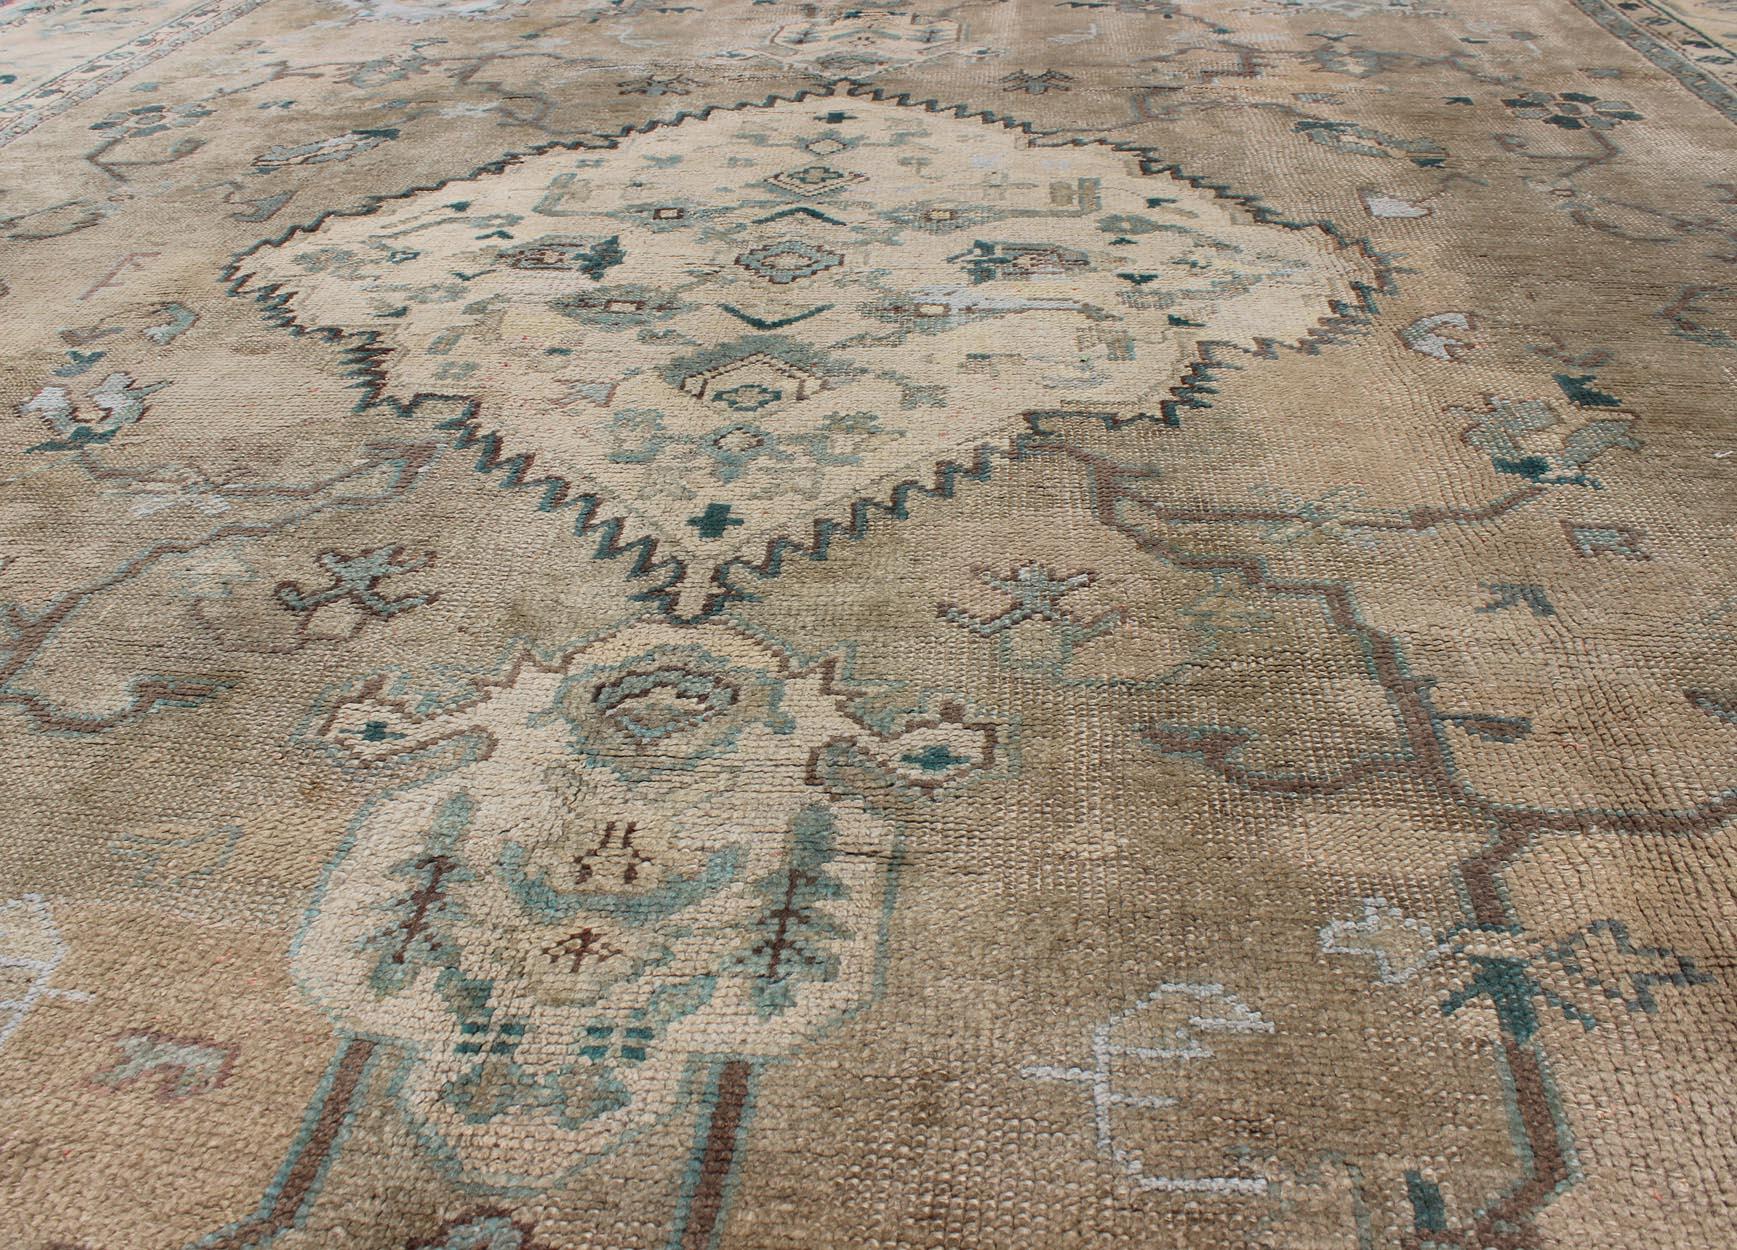 Neutral Antique Oushak Carpet in Shades of Teal, Green, Khaki, Taupe and Butter In Good Condition For Sale In Atlanta, GA